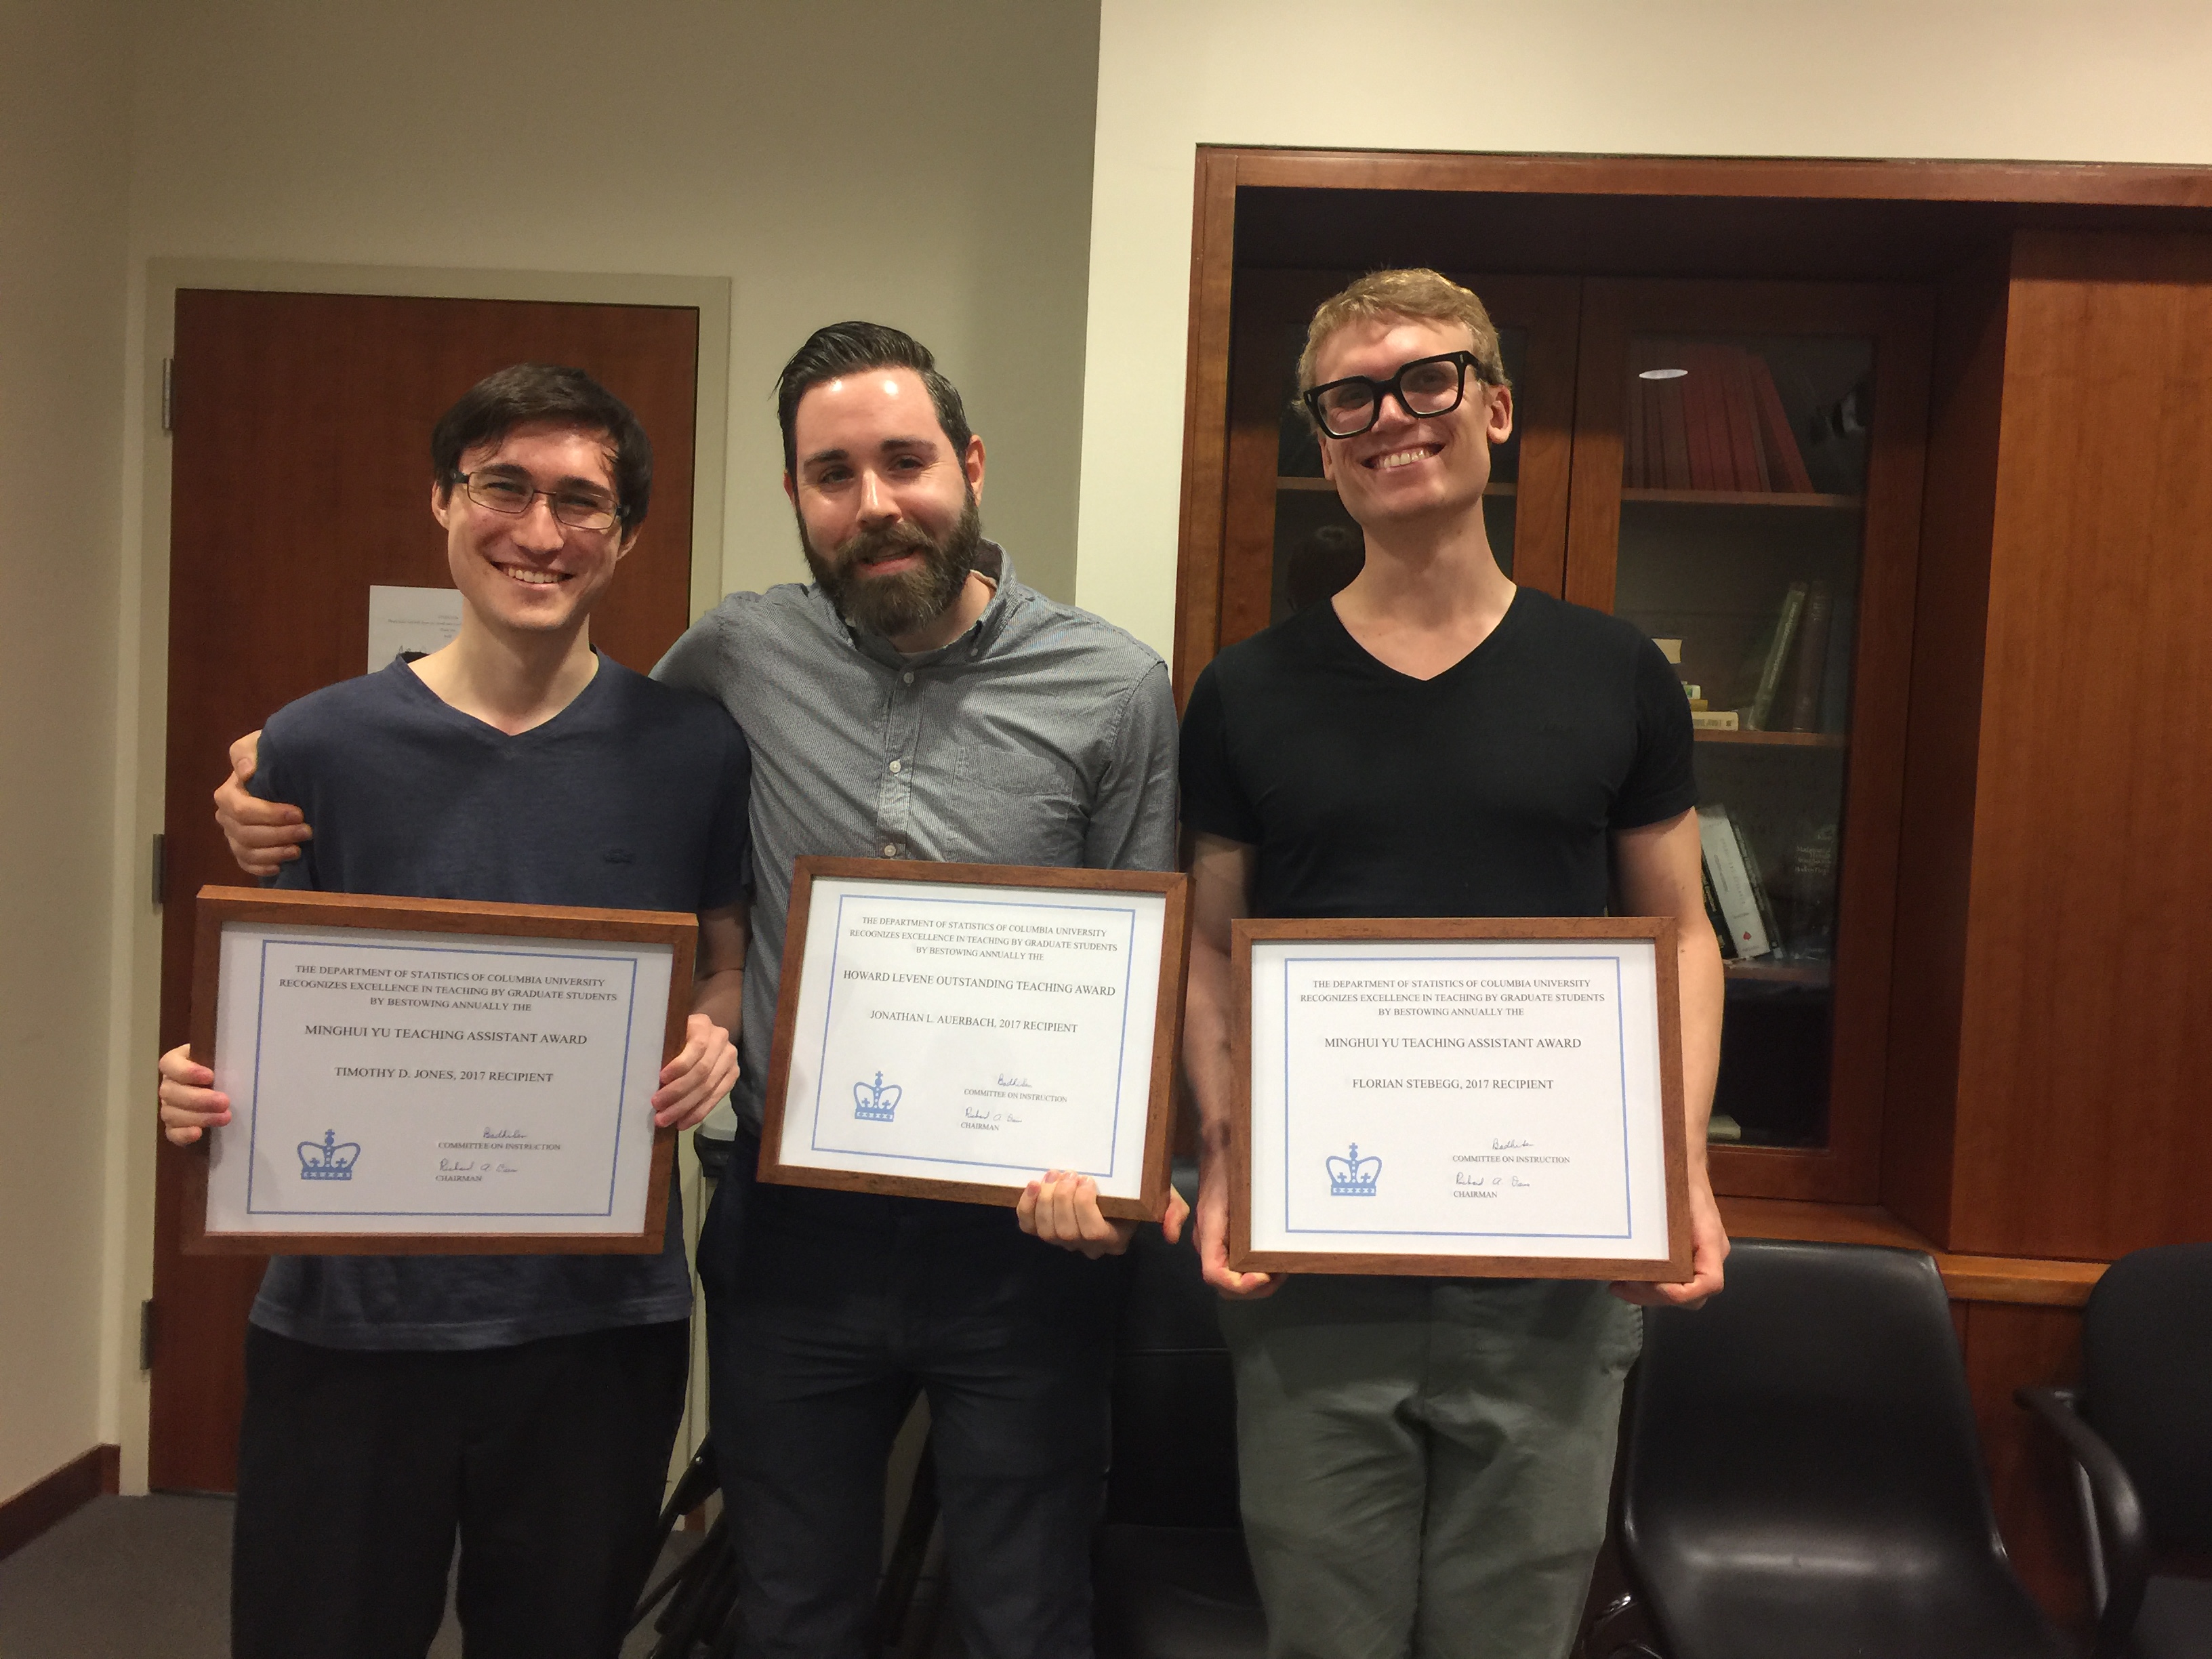 Congratulations to Timothy Donald Jones and Florian Stebegg for being awarded the 2019 Minghui Yu Teaching Assistant Award